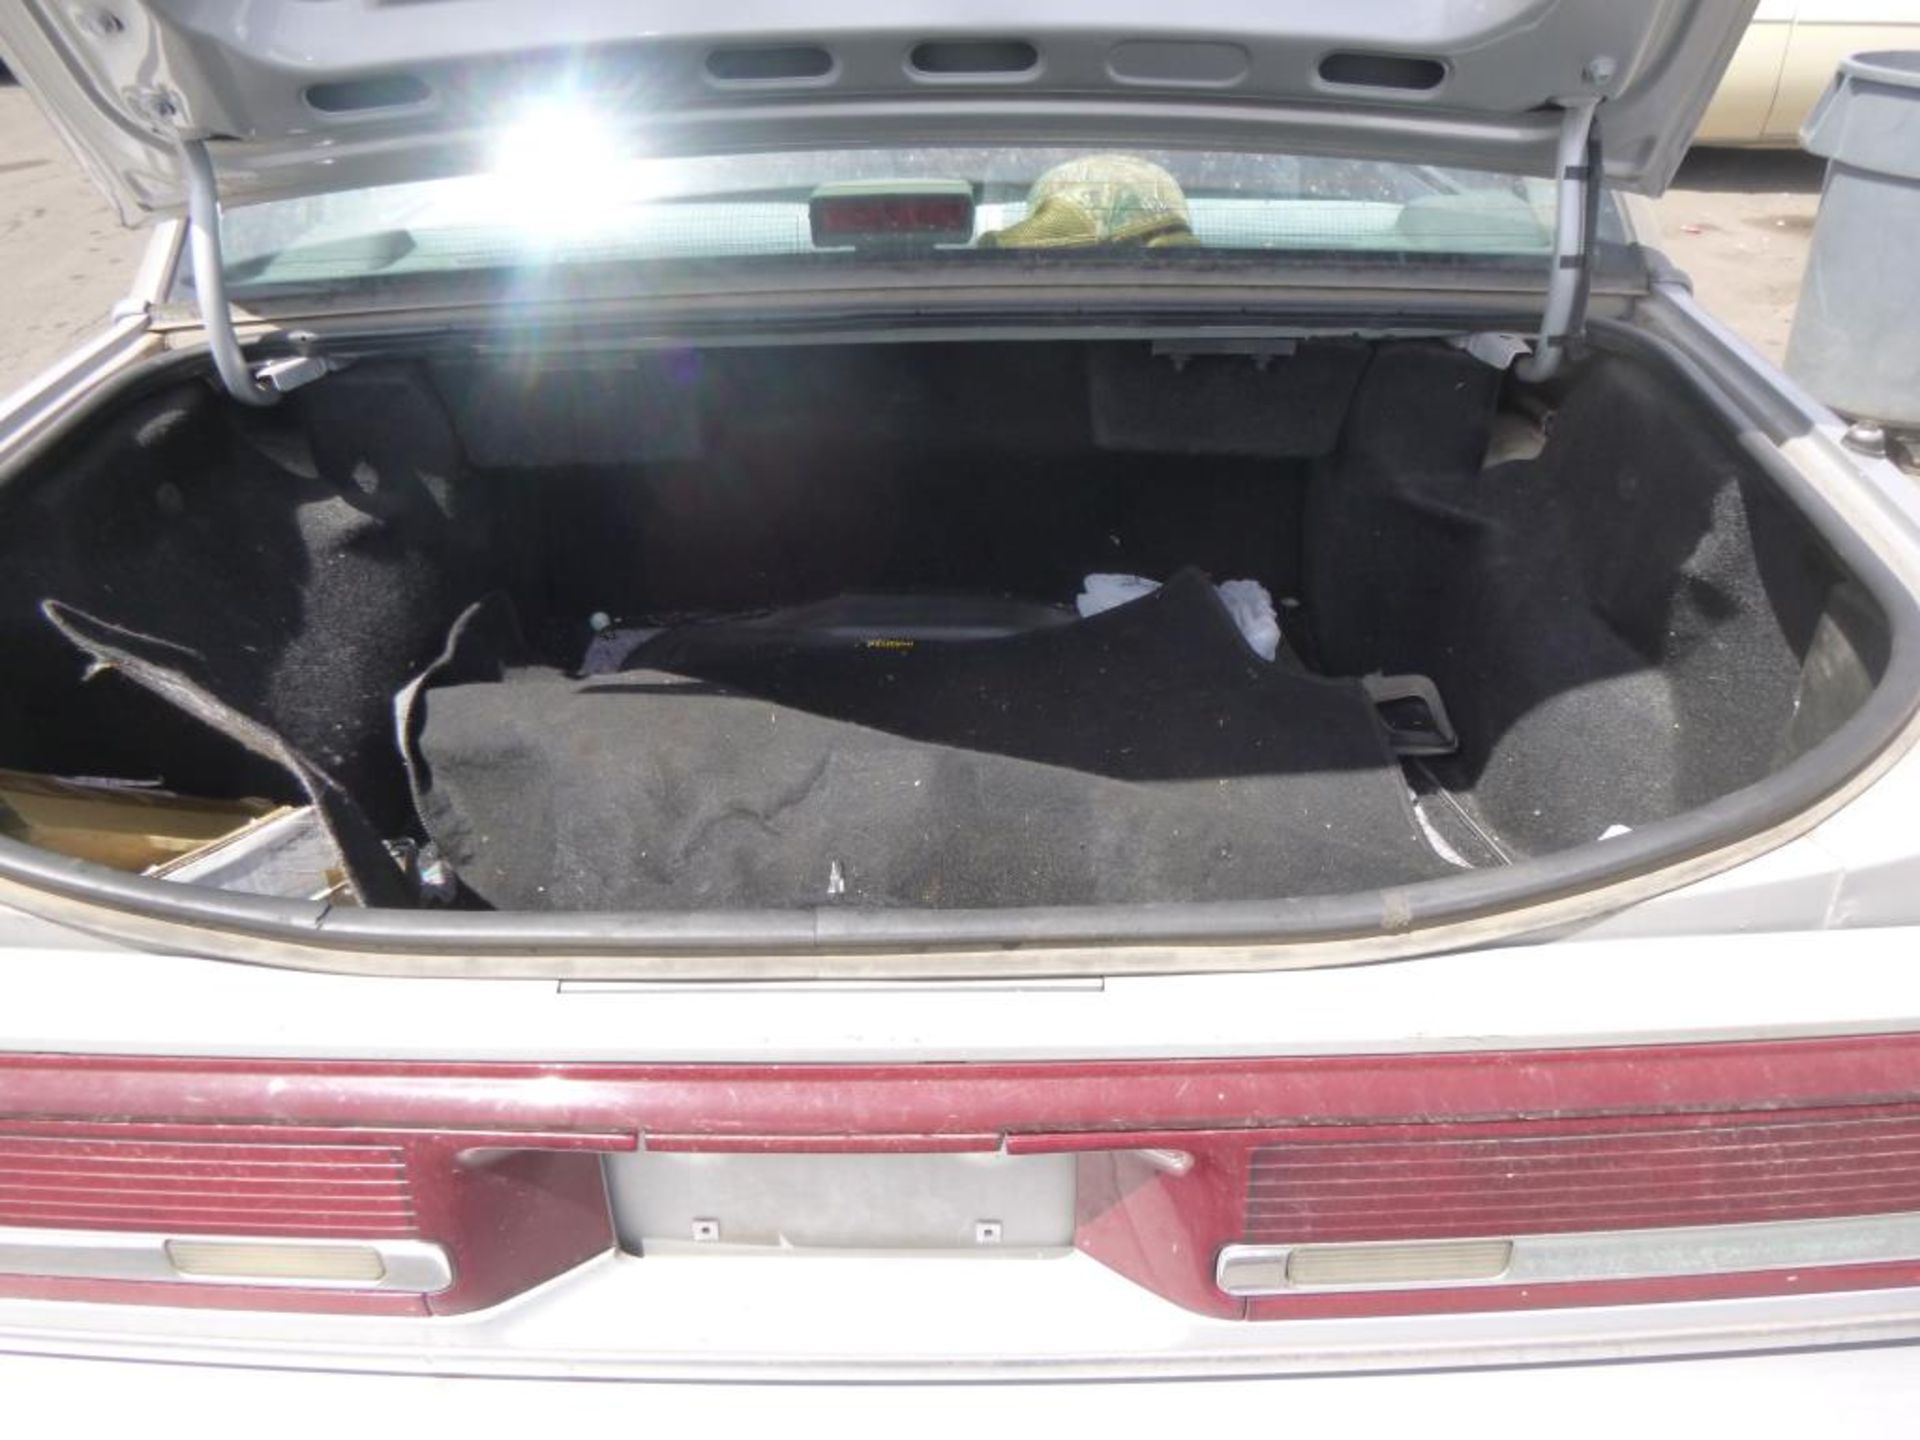 1990 Buick LeSabre - Image 7 of 15